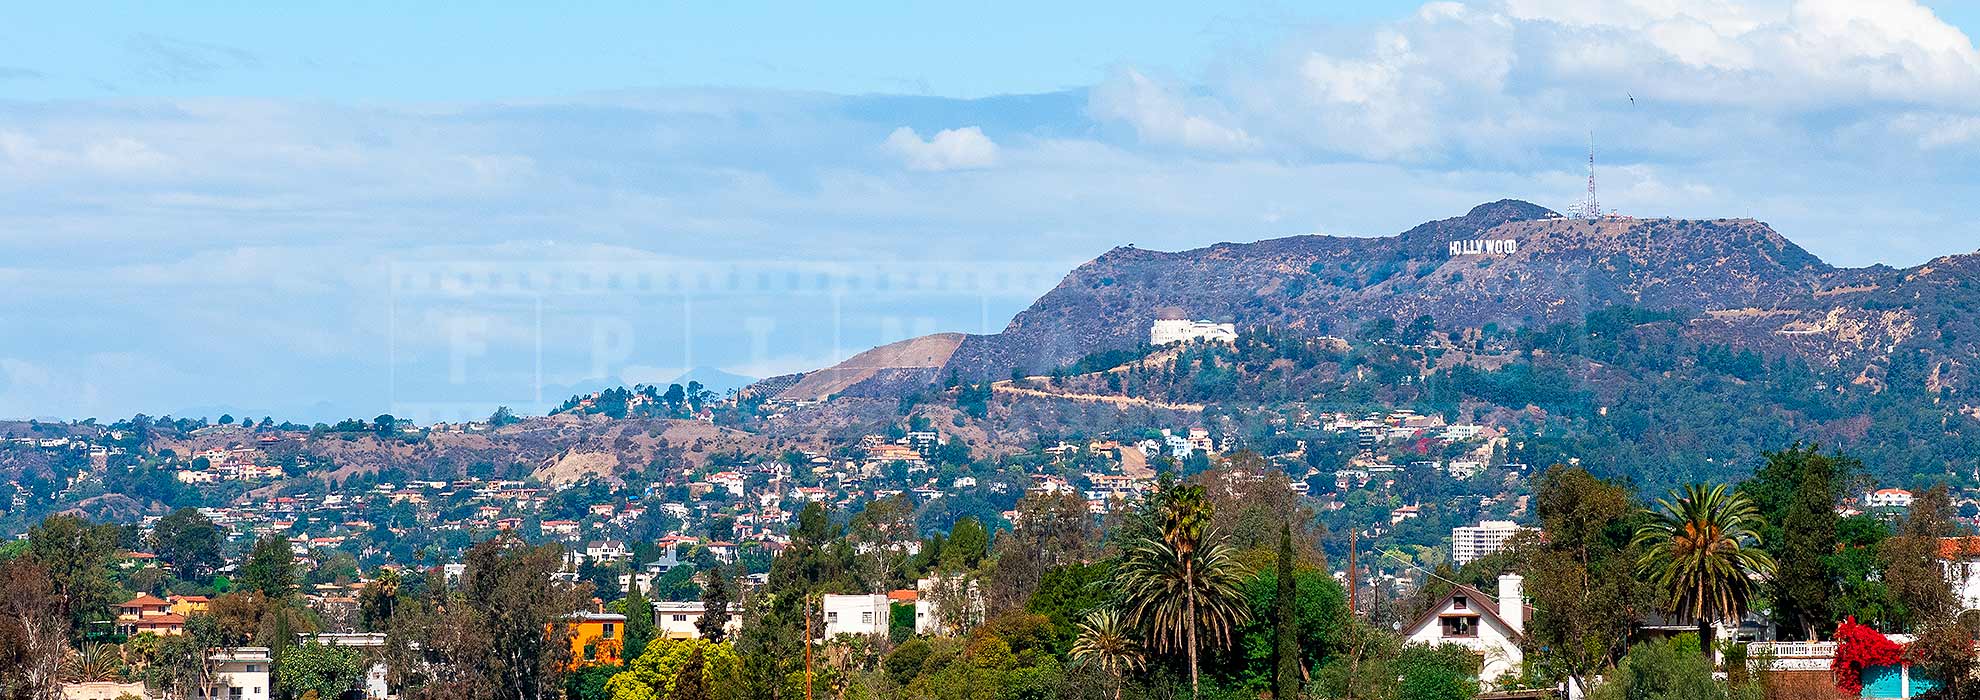 View from Elysian park at Hollywood Hills